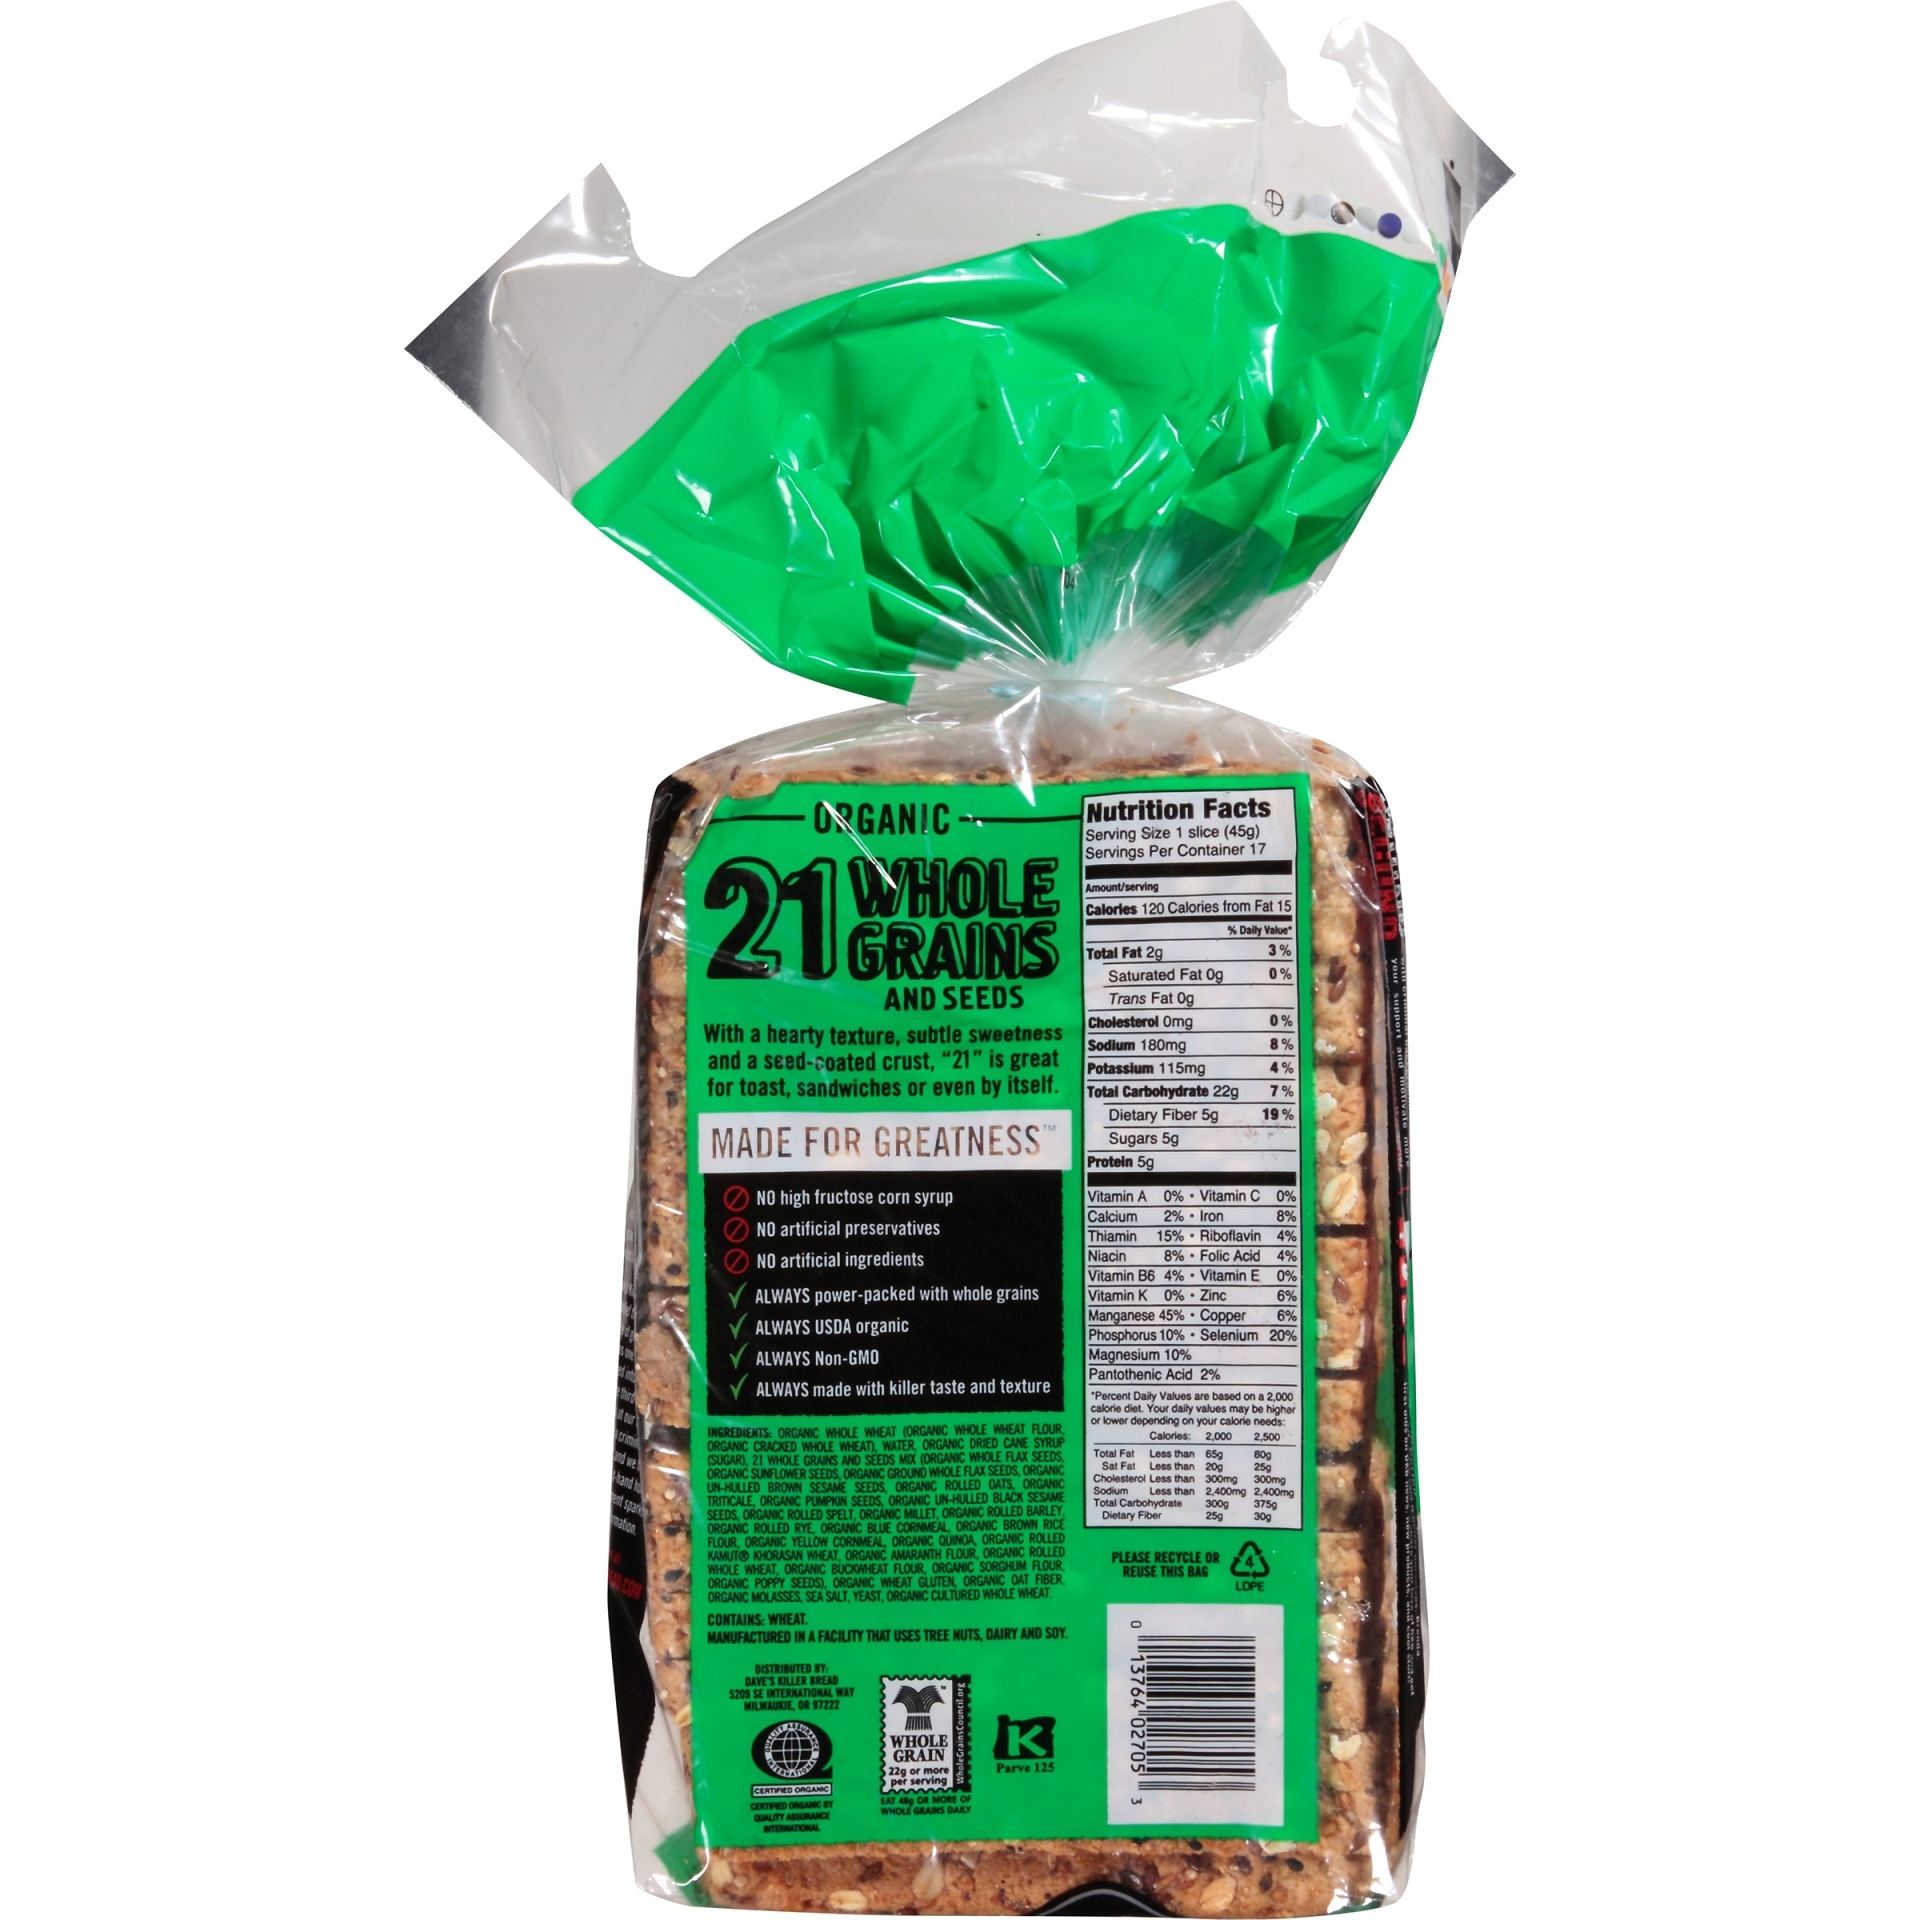 slide 2 of 8, Dave's Killer Bread Organic 21 Whole Grains and Seed Bread, 27 oz